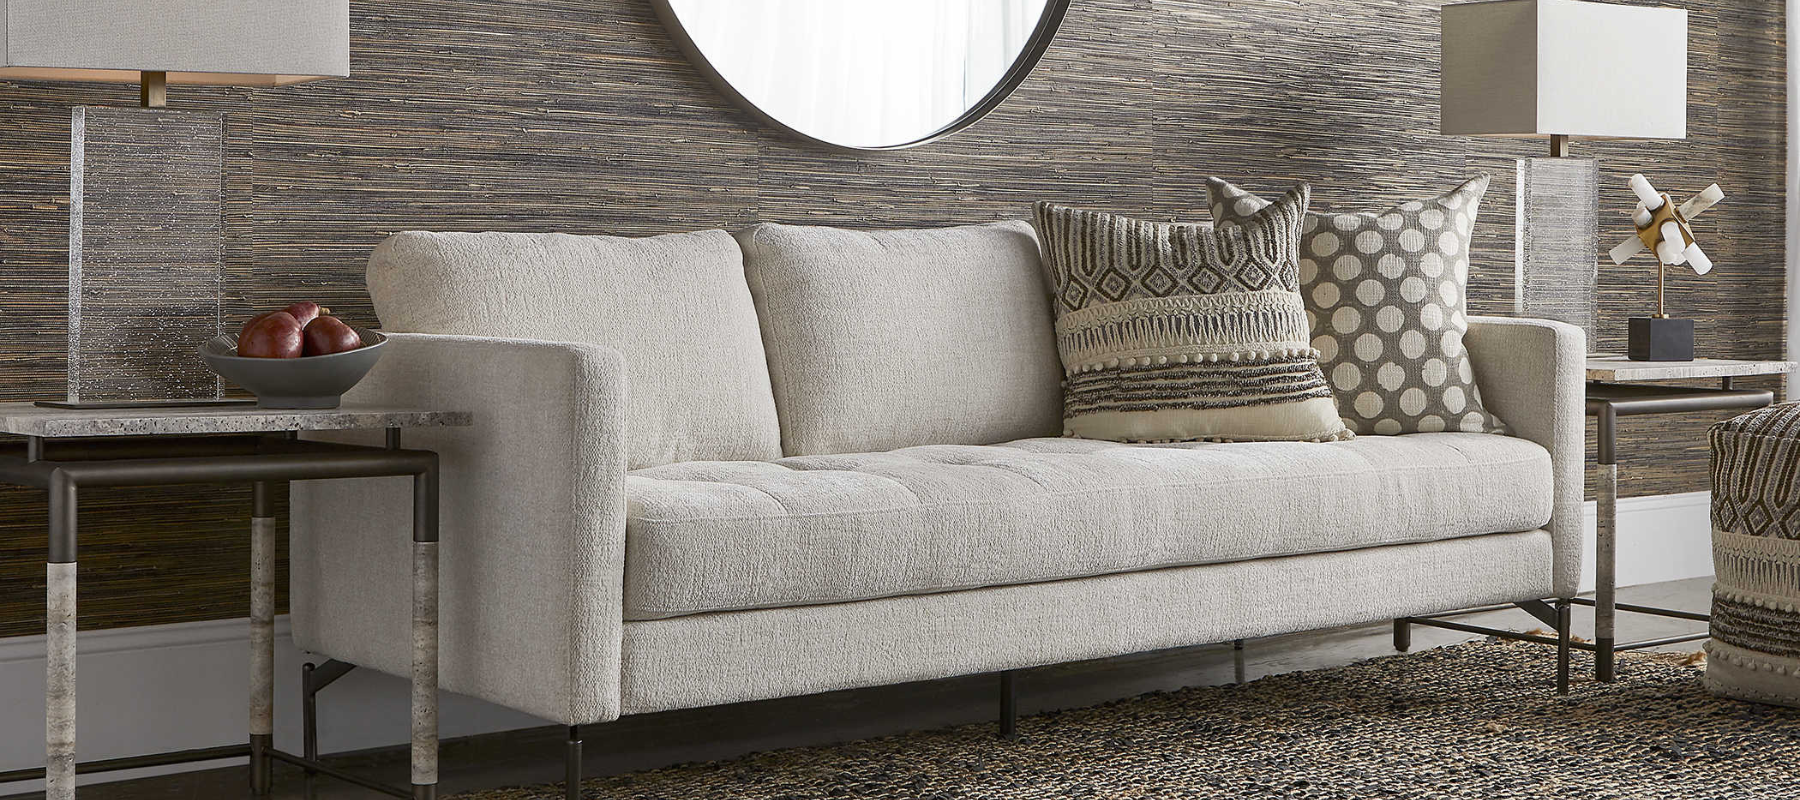 Cream two seater sofa in a living room